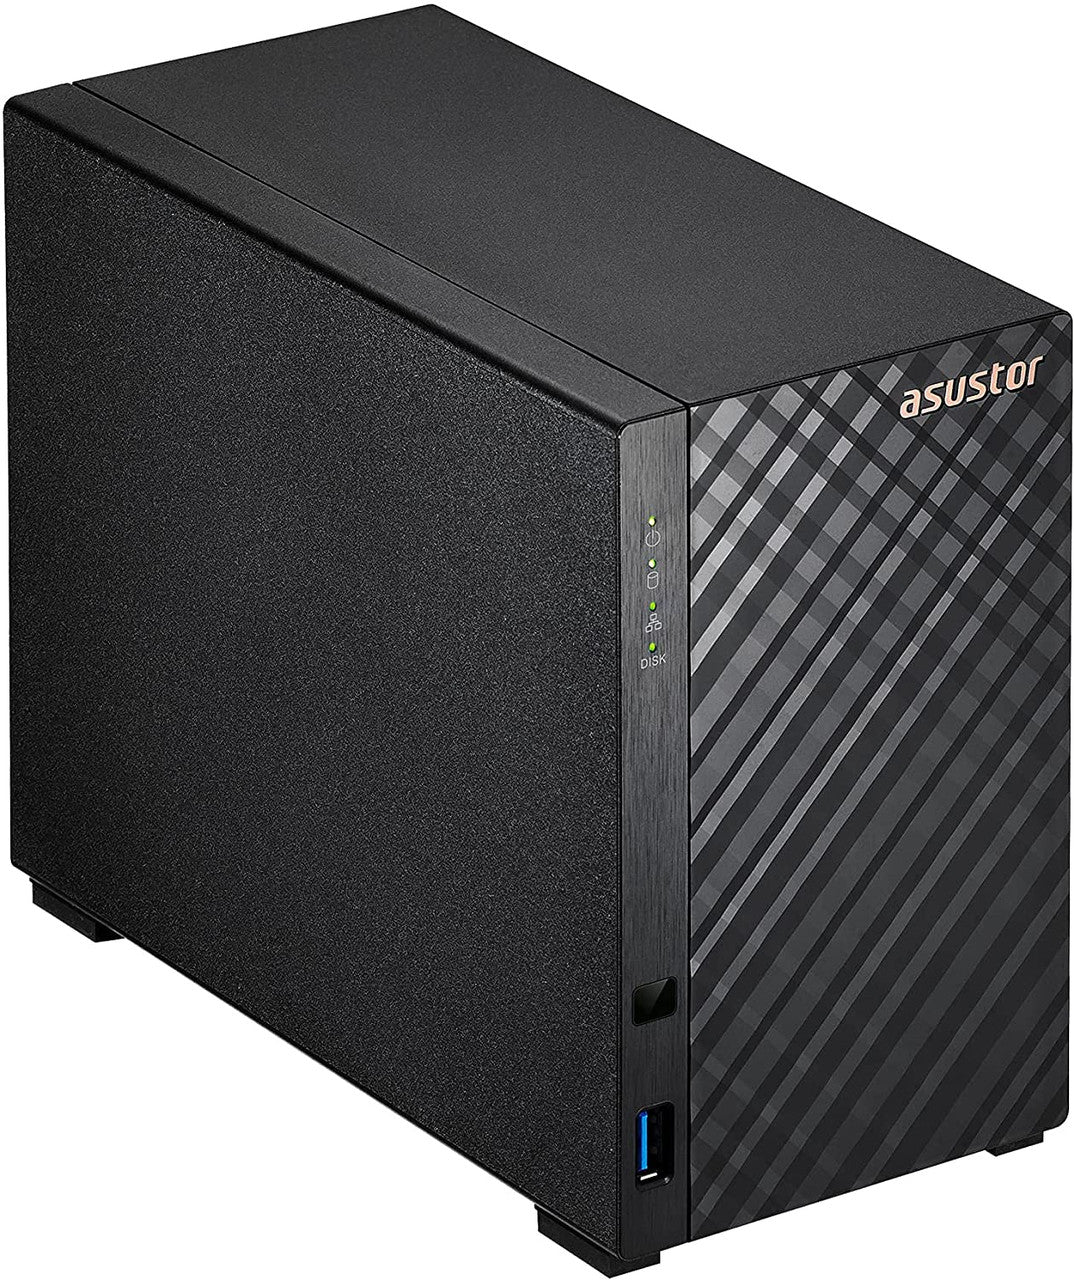 Asustor AS1102T 2-Bay Drivestor 2 NAS with 1GB RAM and 12TB (2x6TB) Western Digital RED Plus Drives